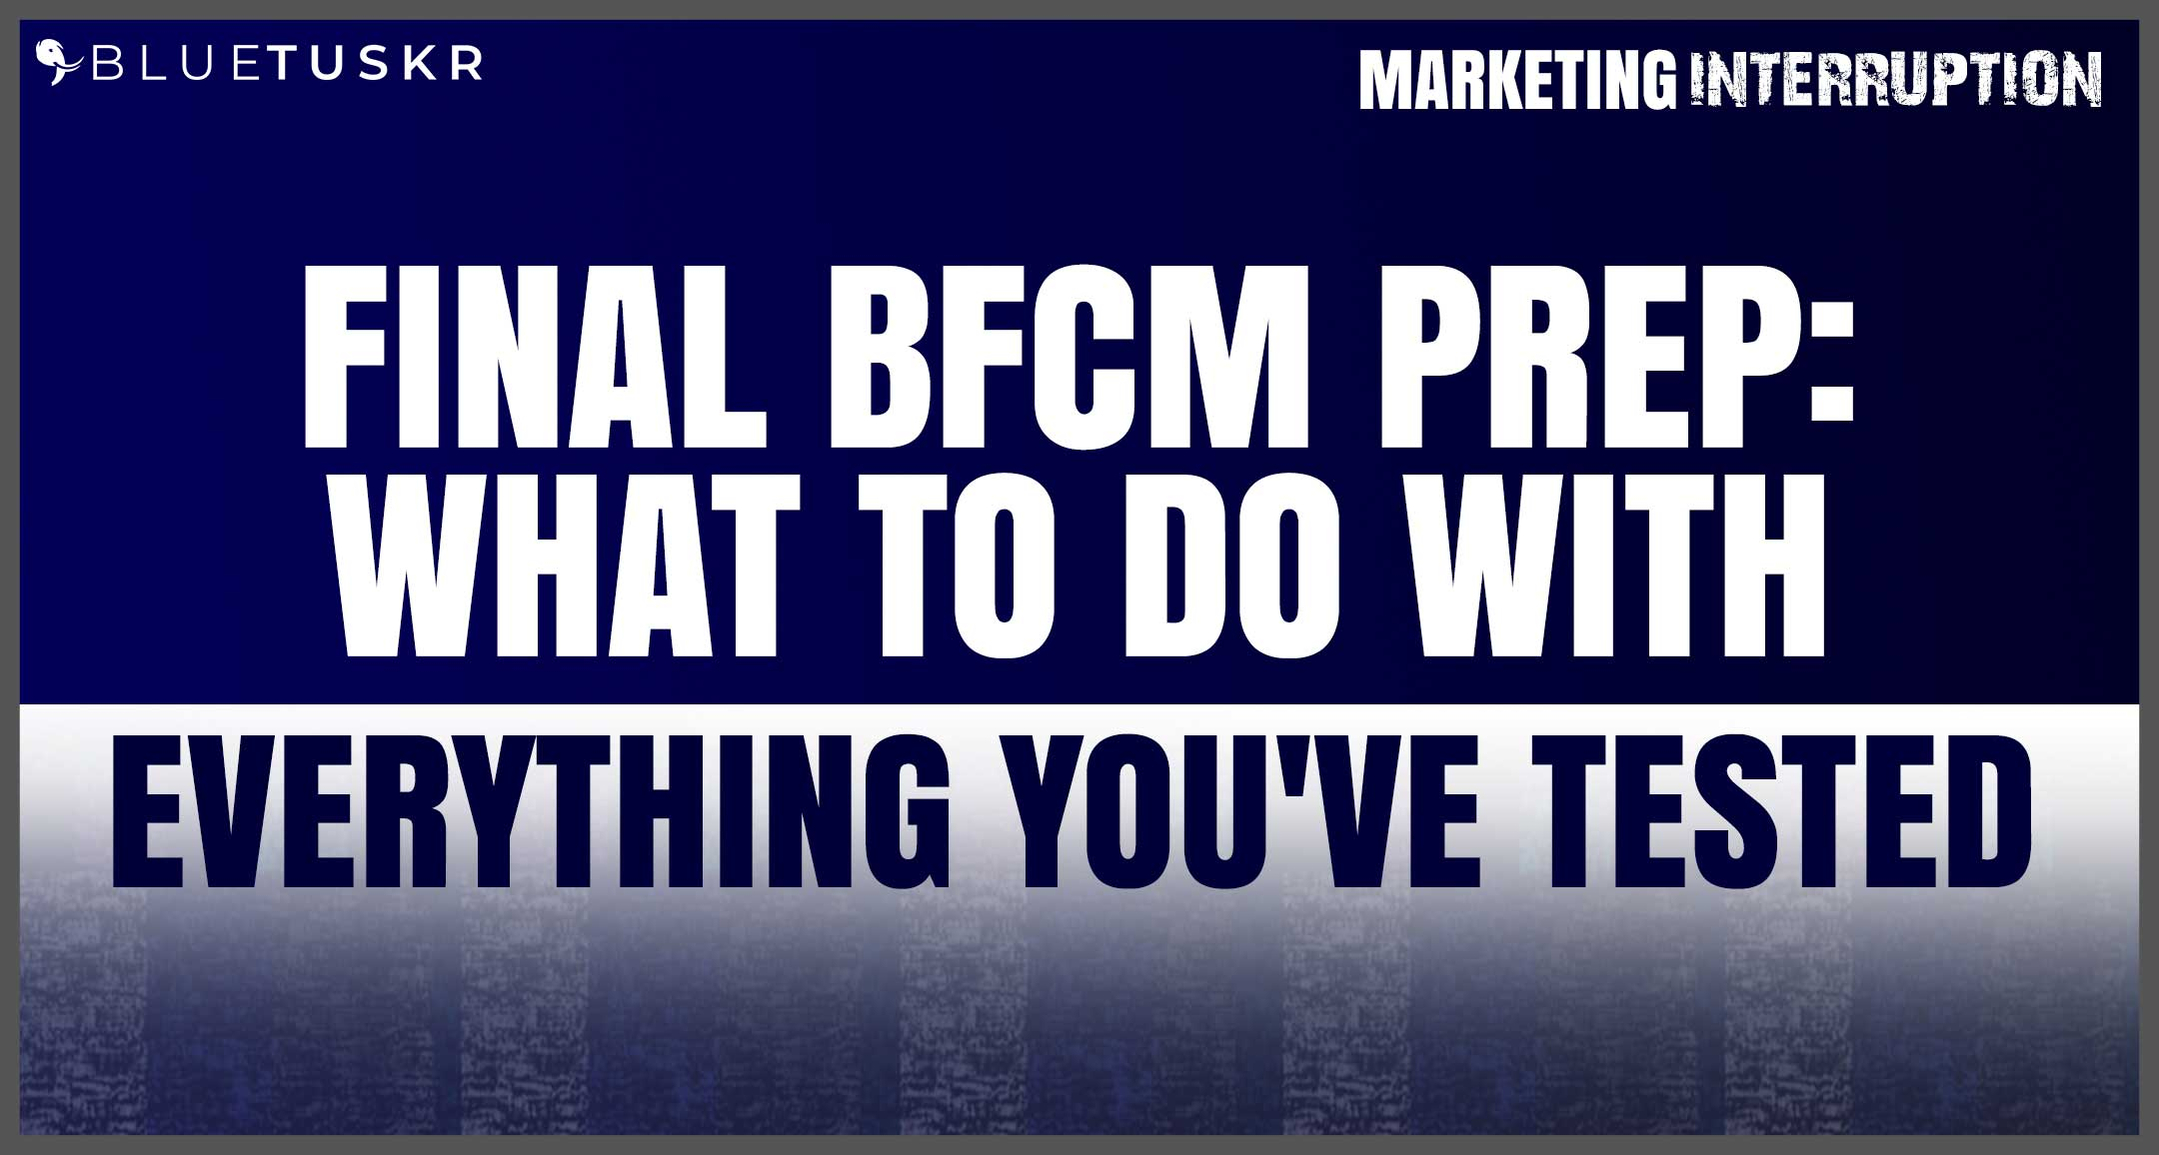 Final BFCM Prep: What To Do With Everything You've Tested